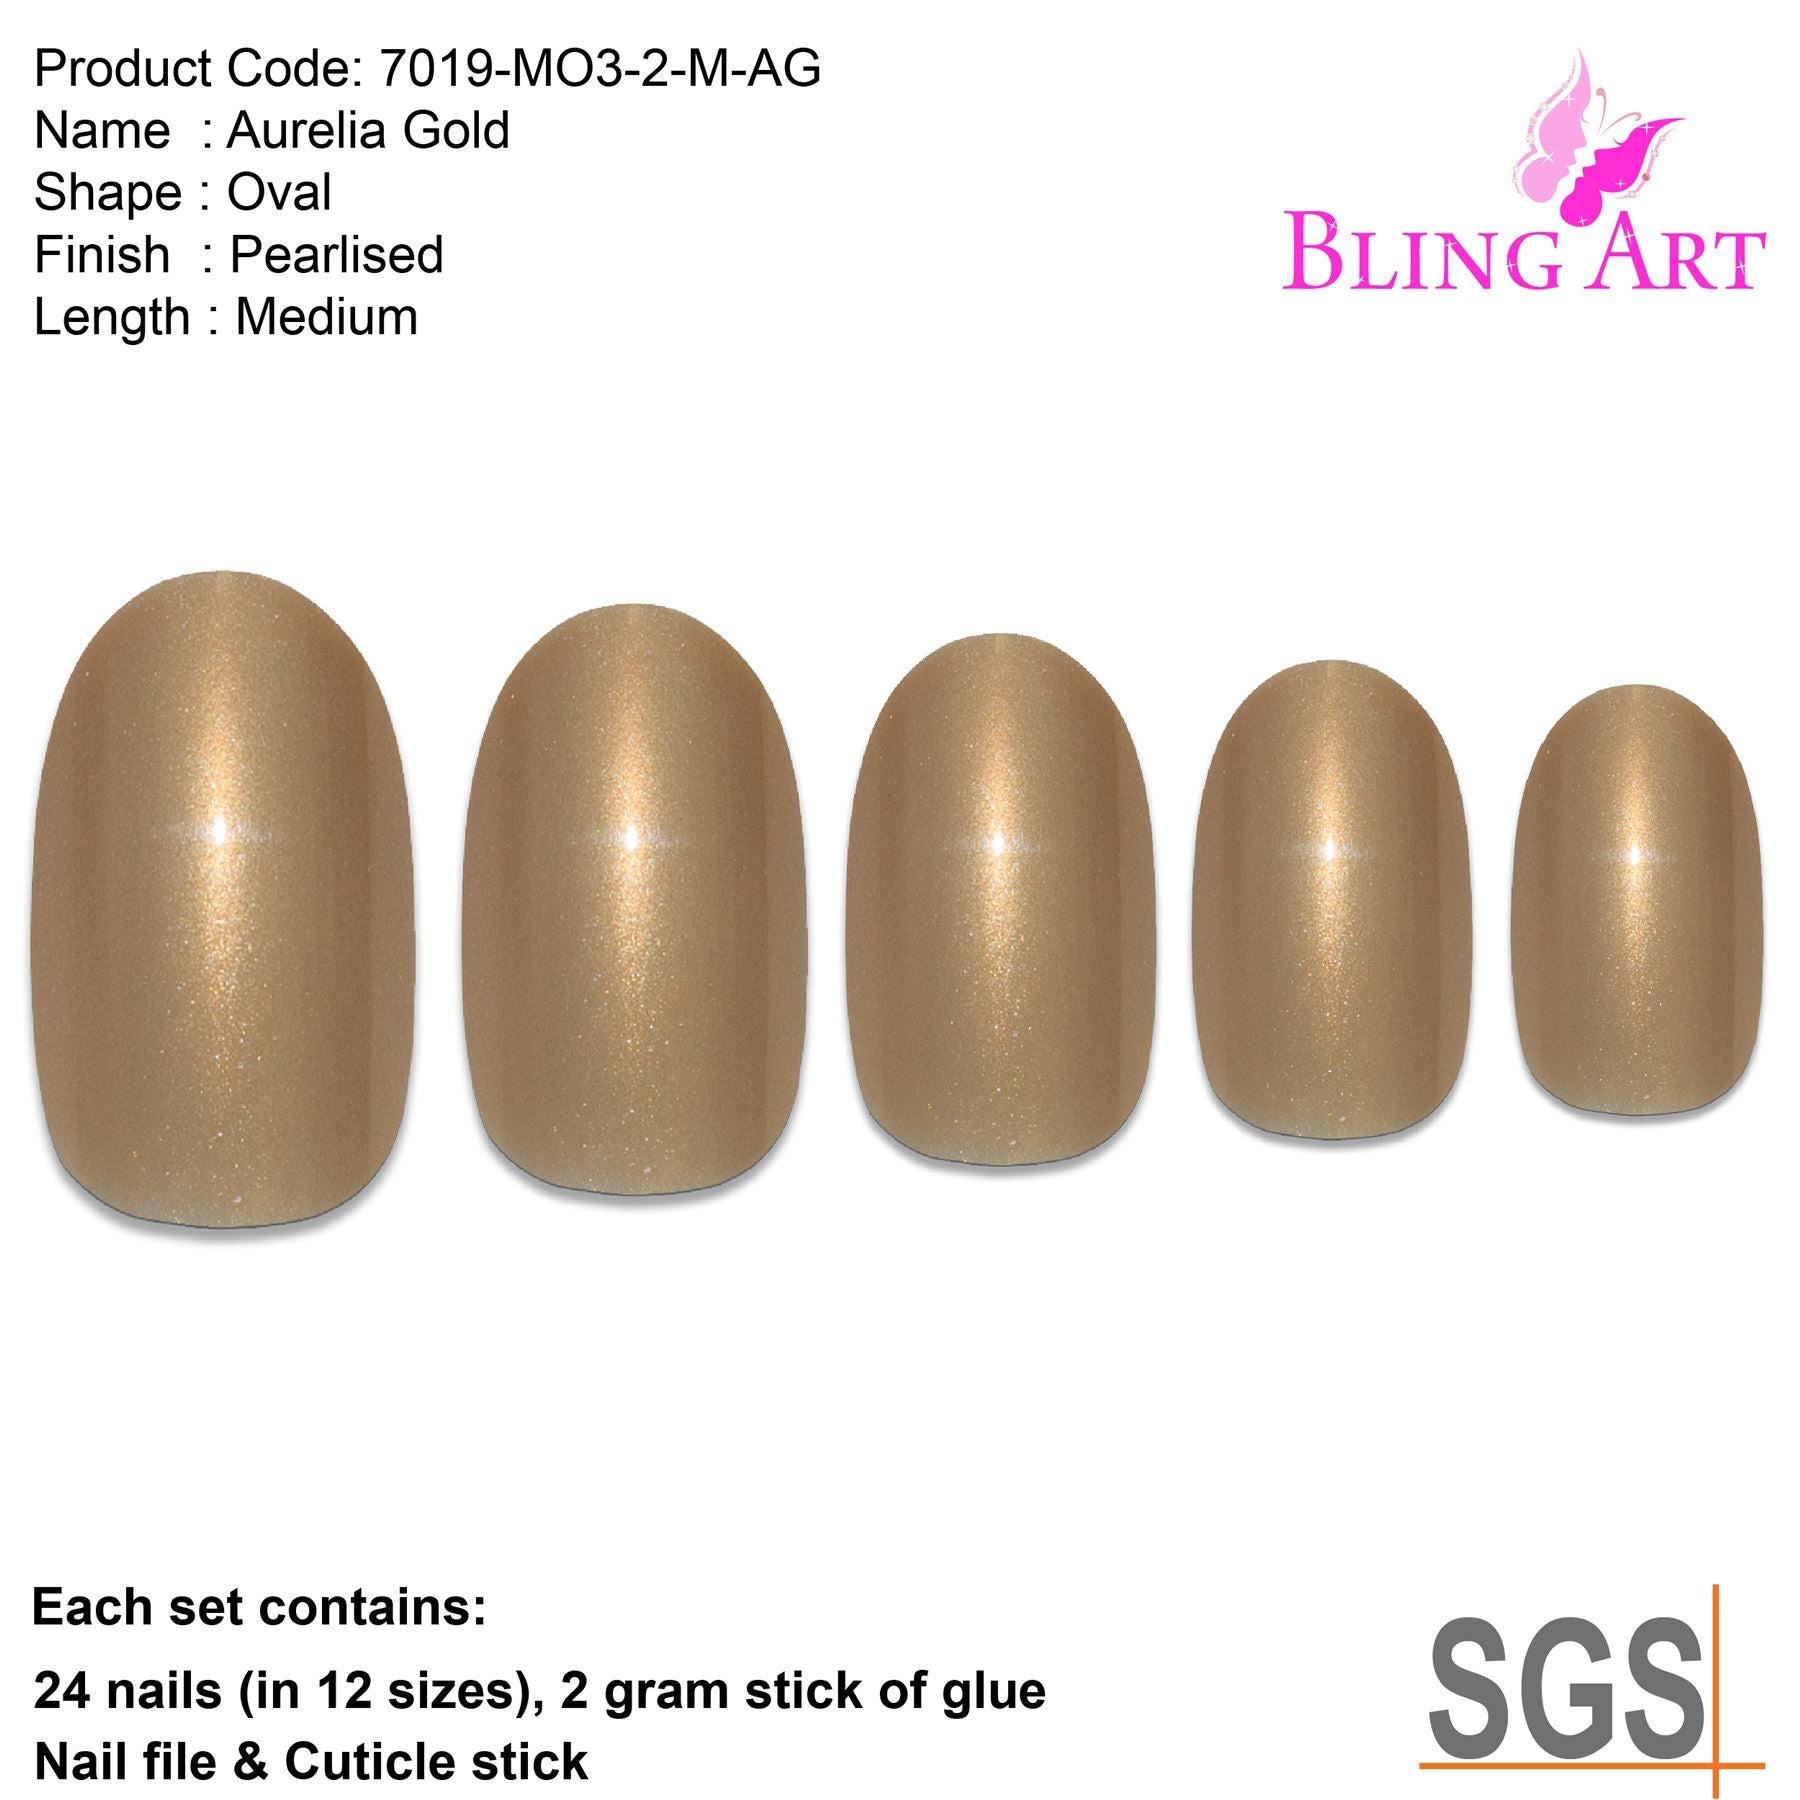 False Nails by Bling Art Gold Glitter Oval Medium Fake Acrylic 24 Tips with Glue